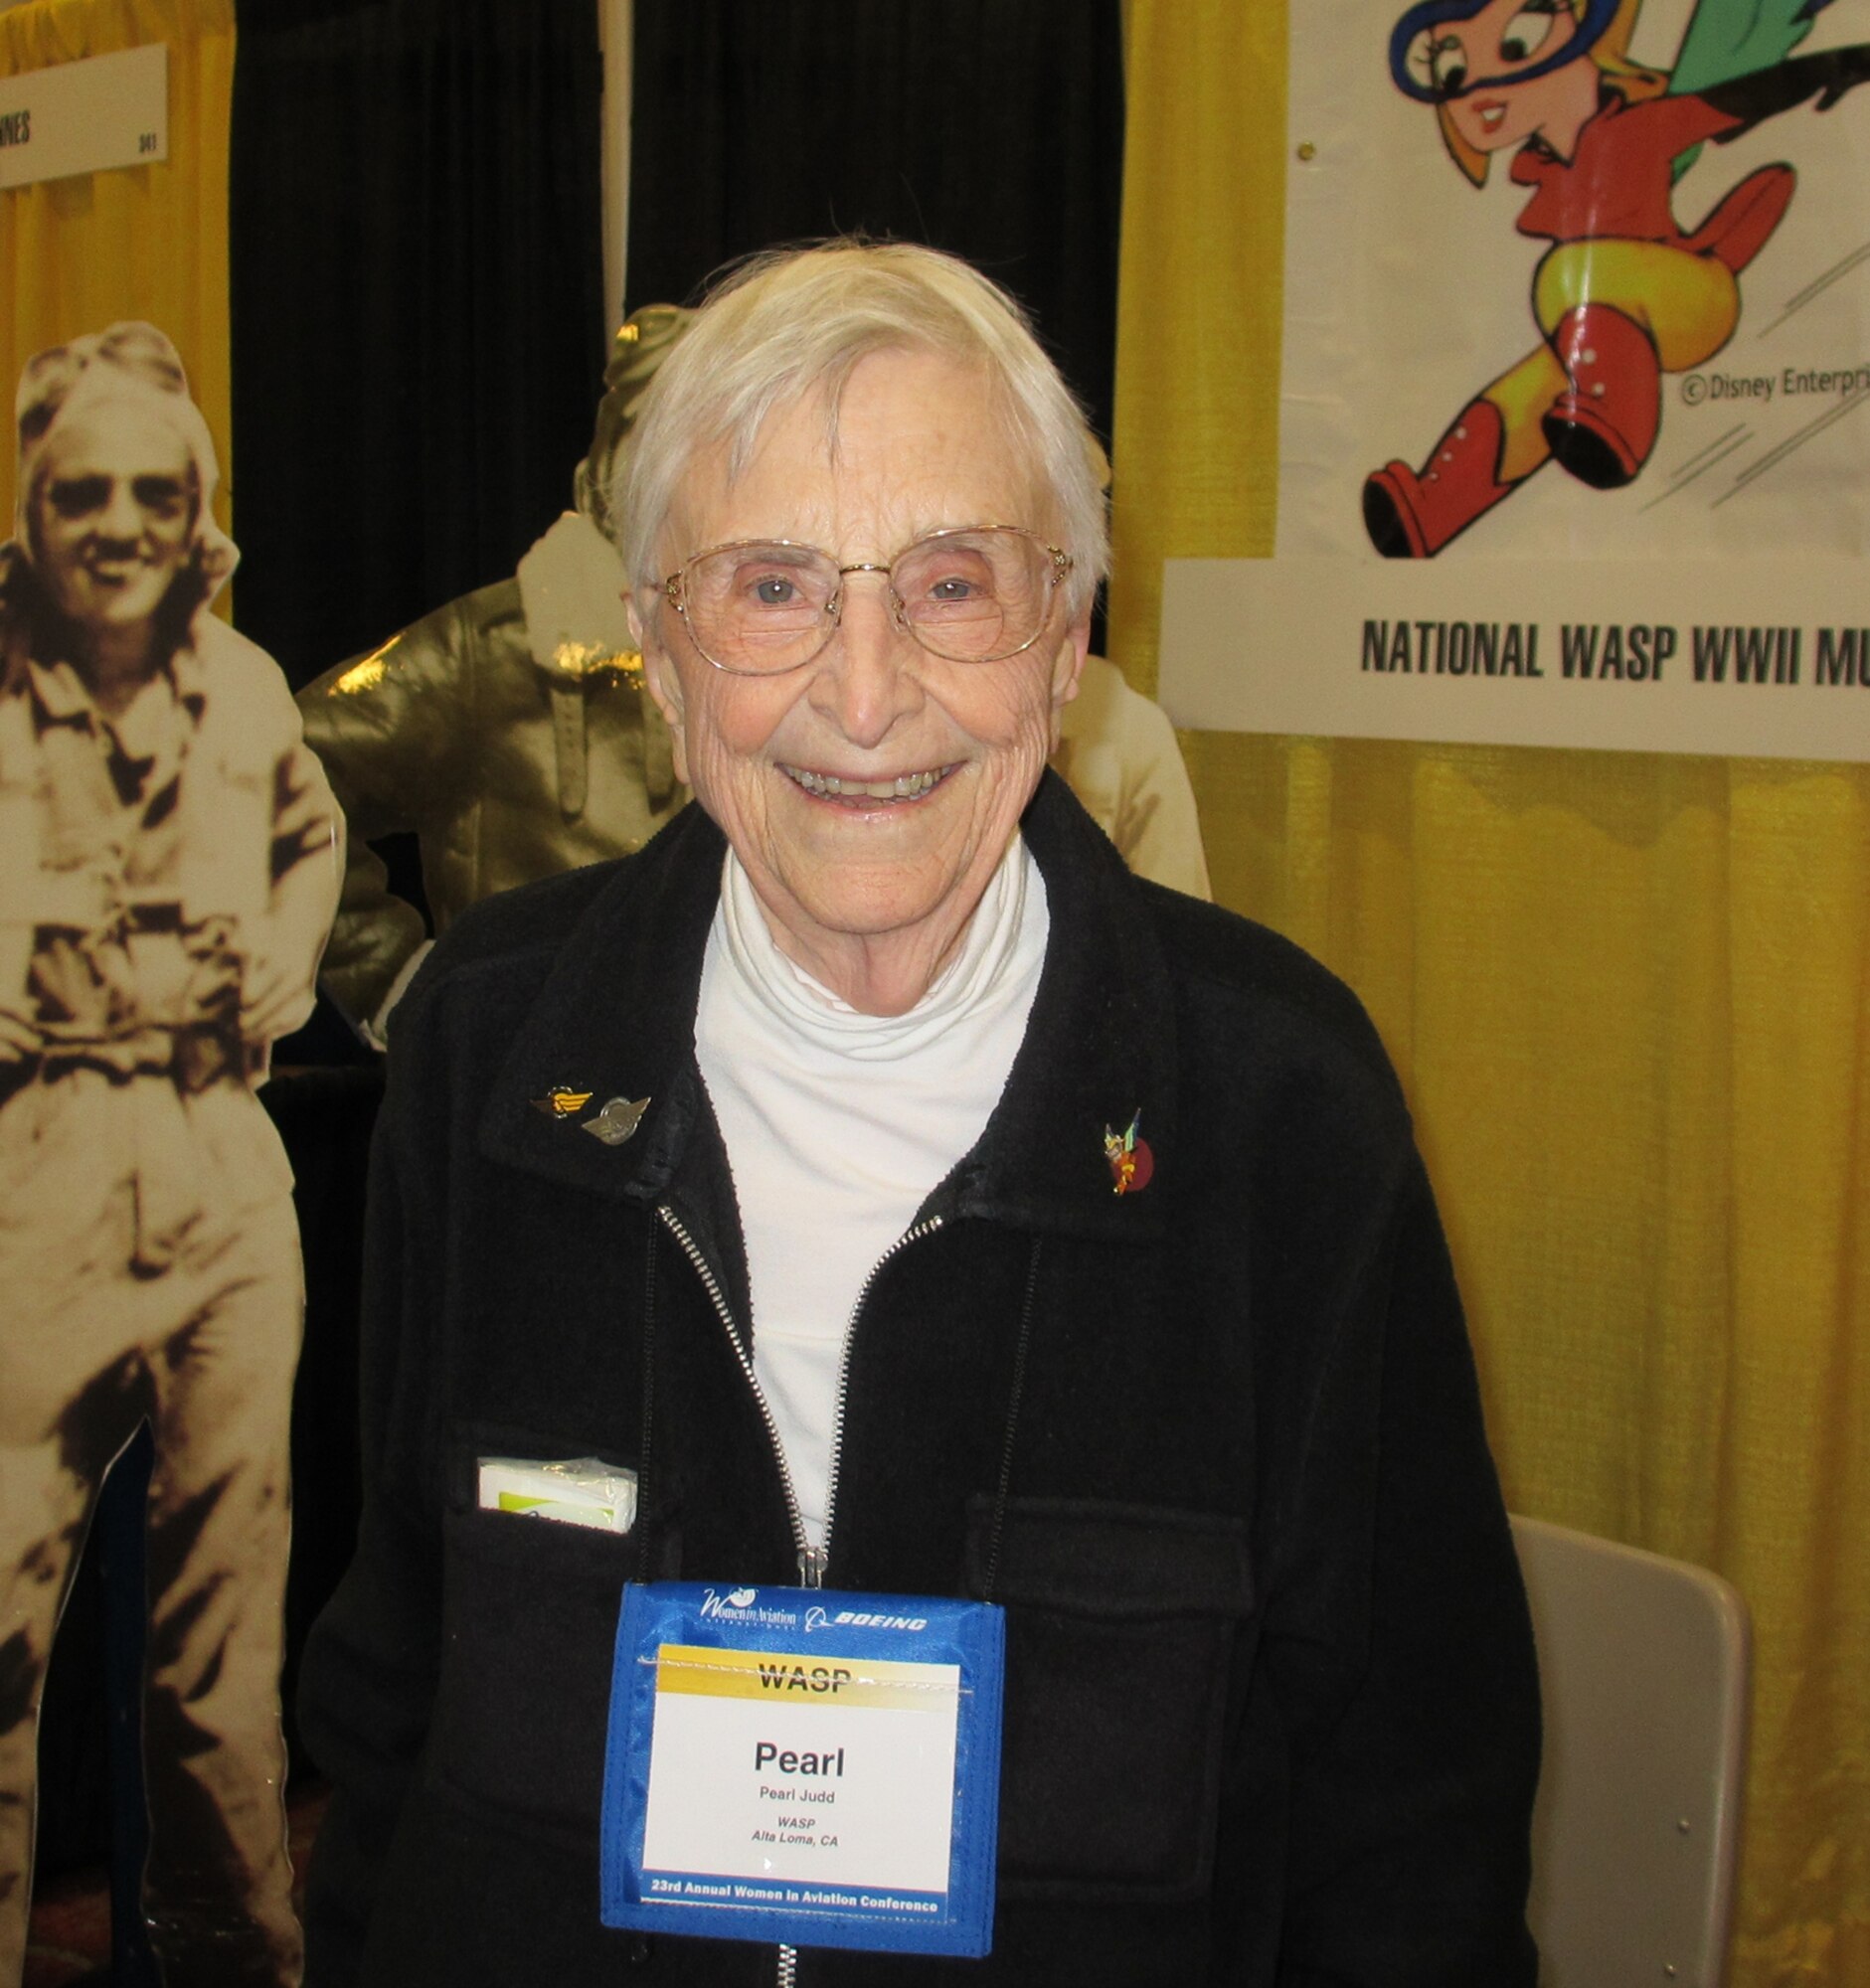 Pearl Judd, a Women Airforce Service Pilot, attends the vendor fair of the International Women in Aviation conference March 8-10, 2012 in Dallas.  The conference included a WASP presentation and a chance to interact with the Word War II era women pilots. (courtesy photo)